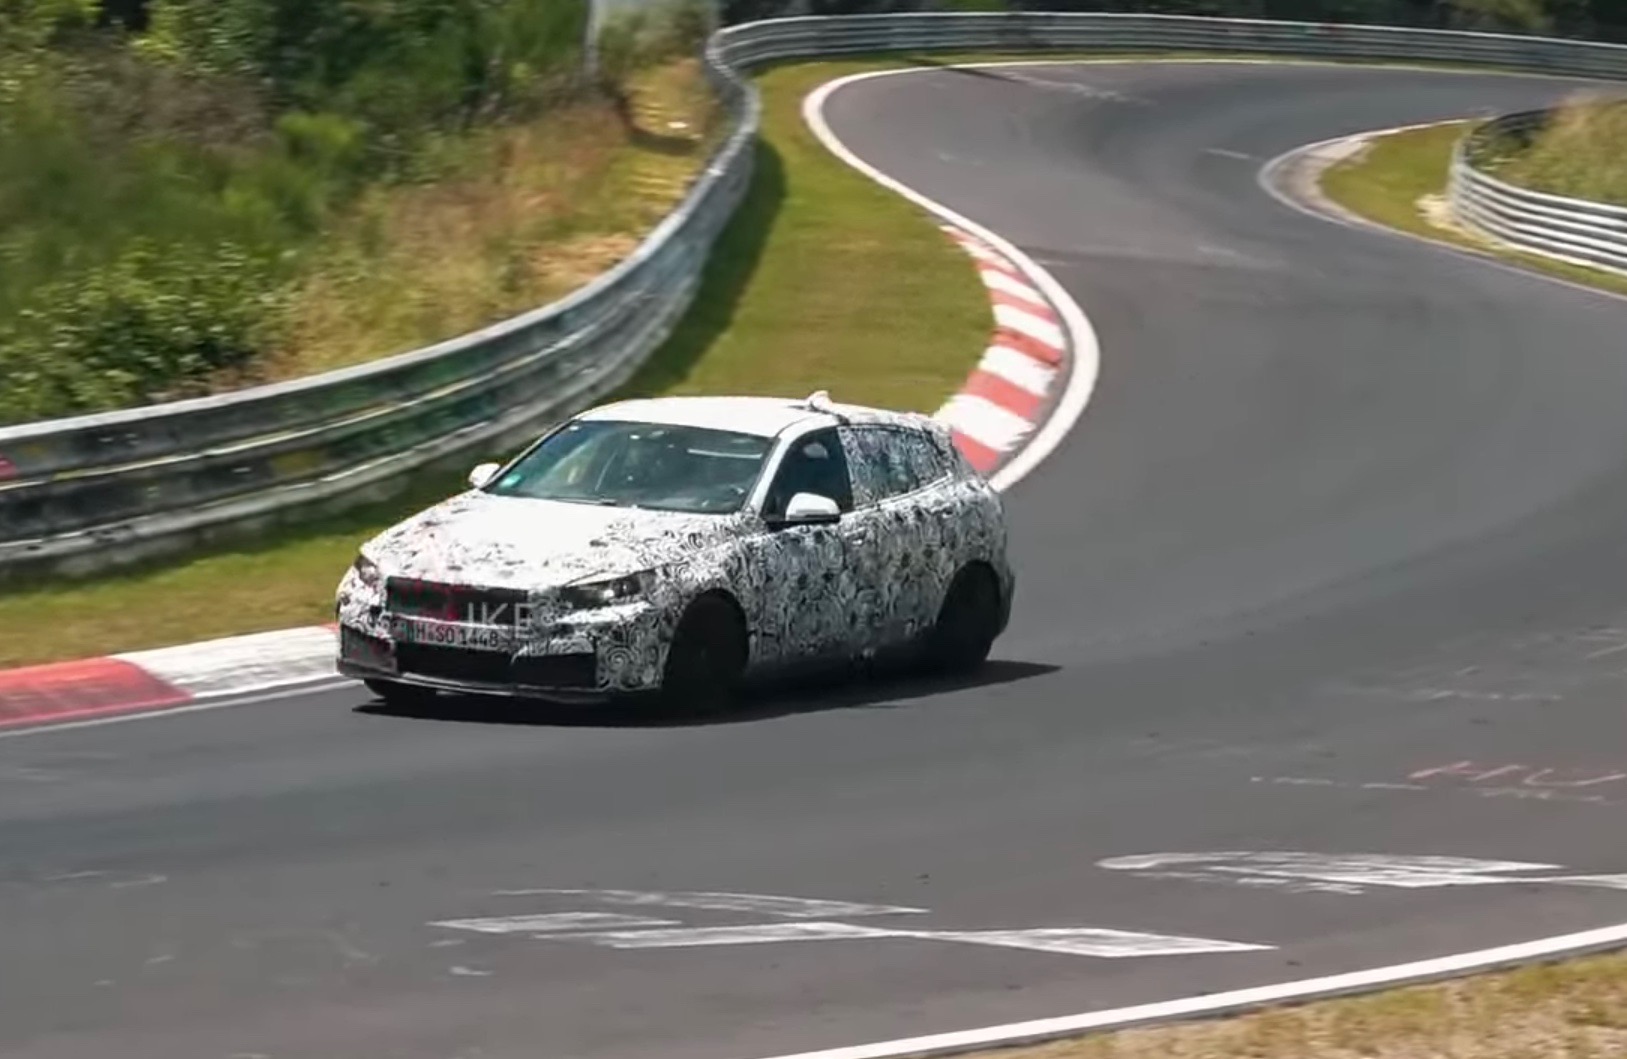 Video: 2019 BMW 1 Series spotted, M140i form with AWD?